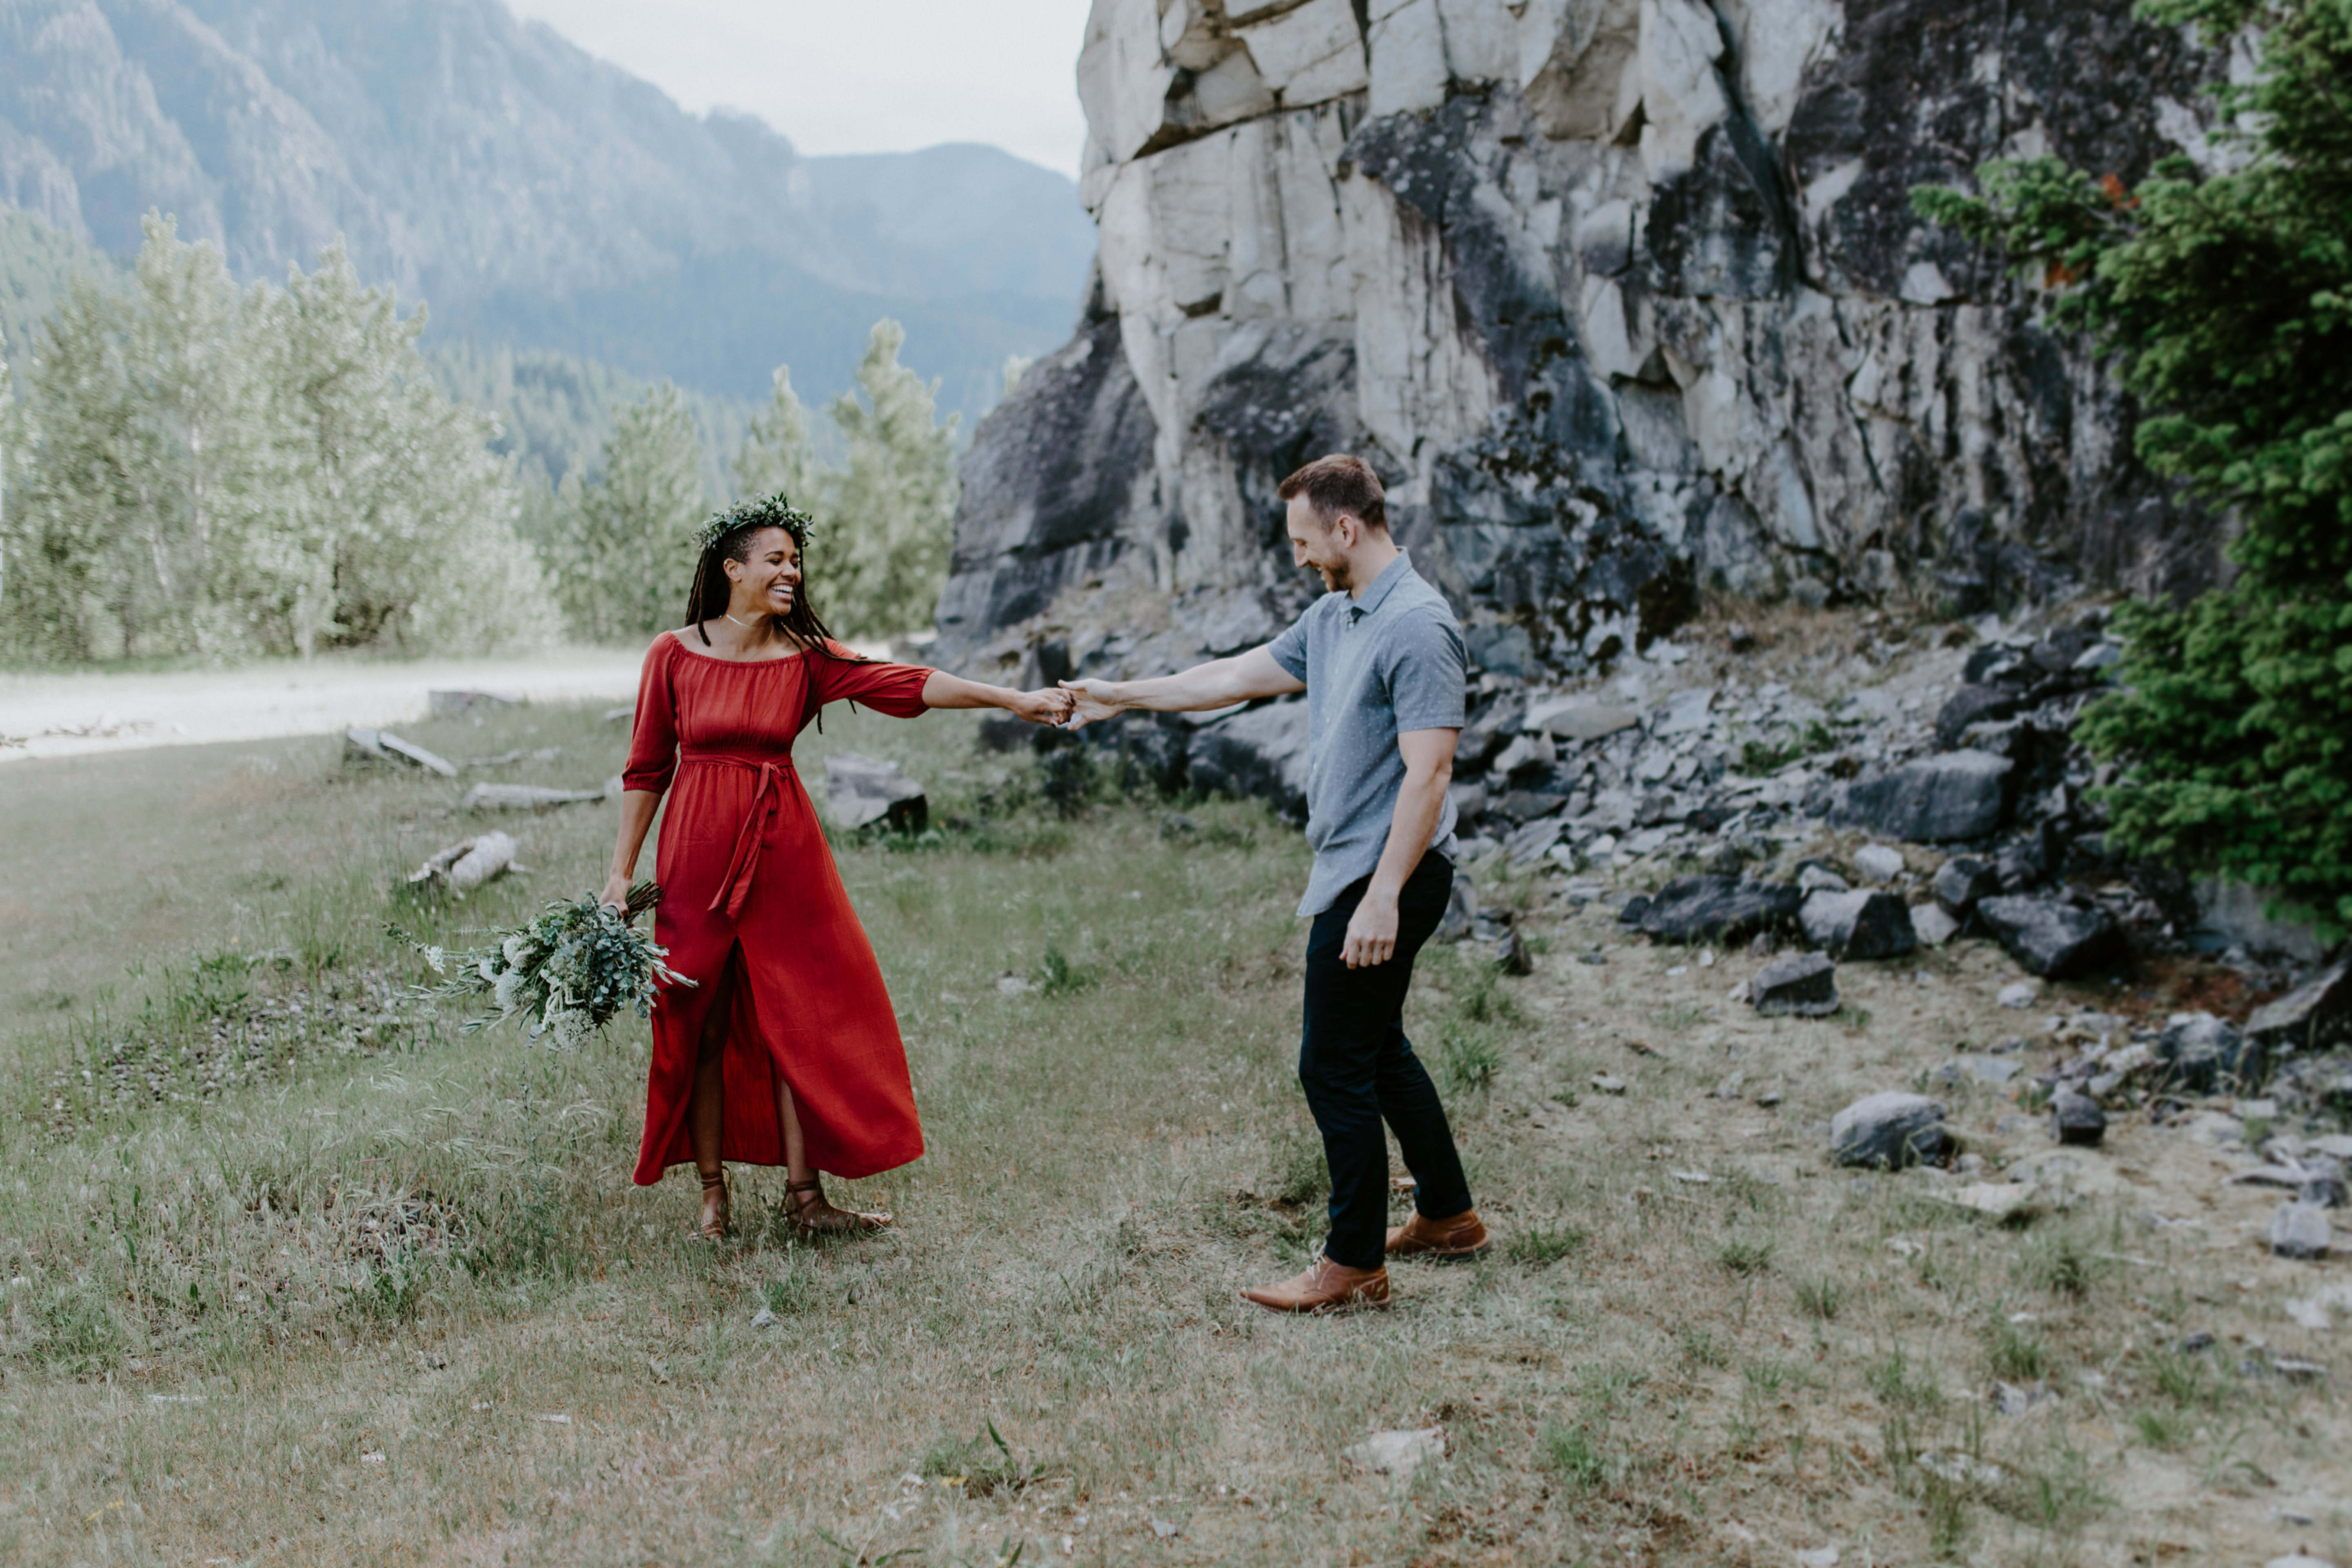 Kayloni and Garrett dance at the Columbia River Gorge in Oregon. Engagement photography in Portland Oregon by Sienna Plus Josh.